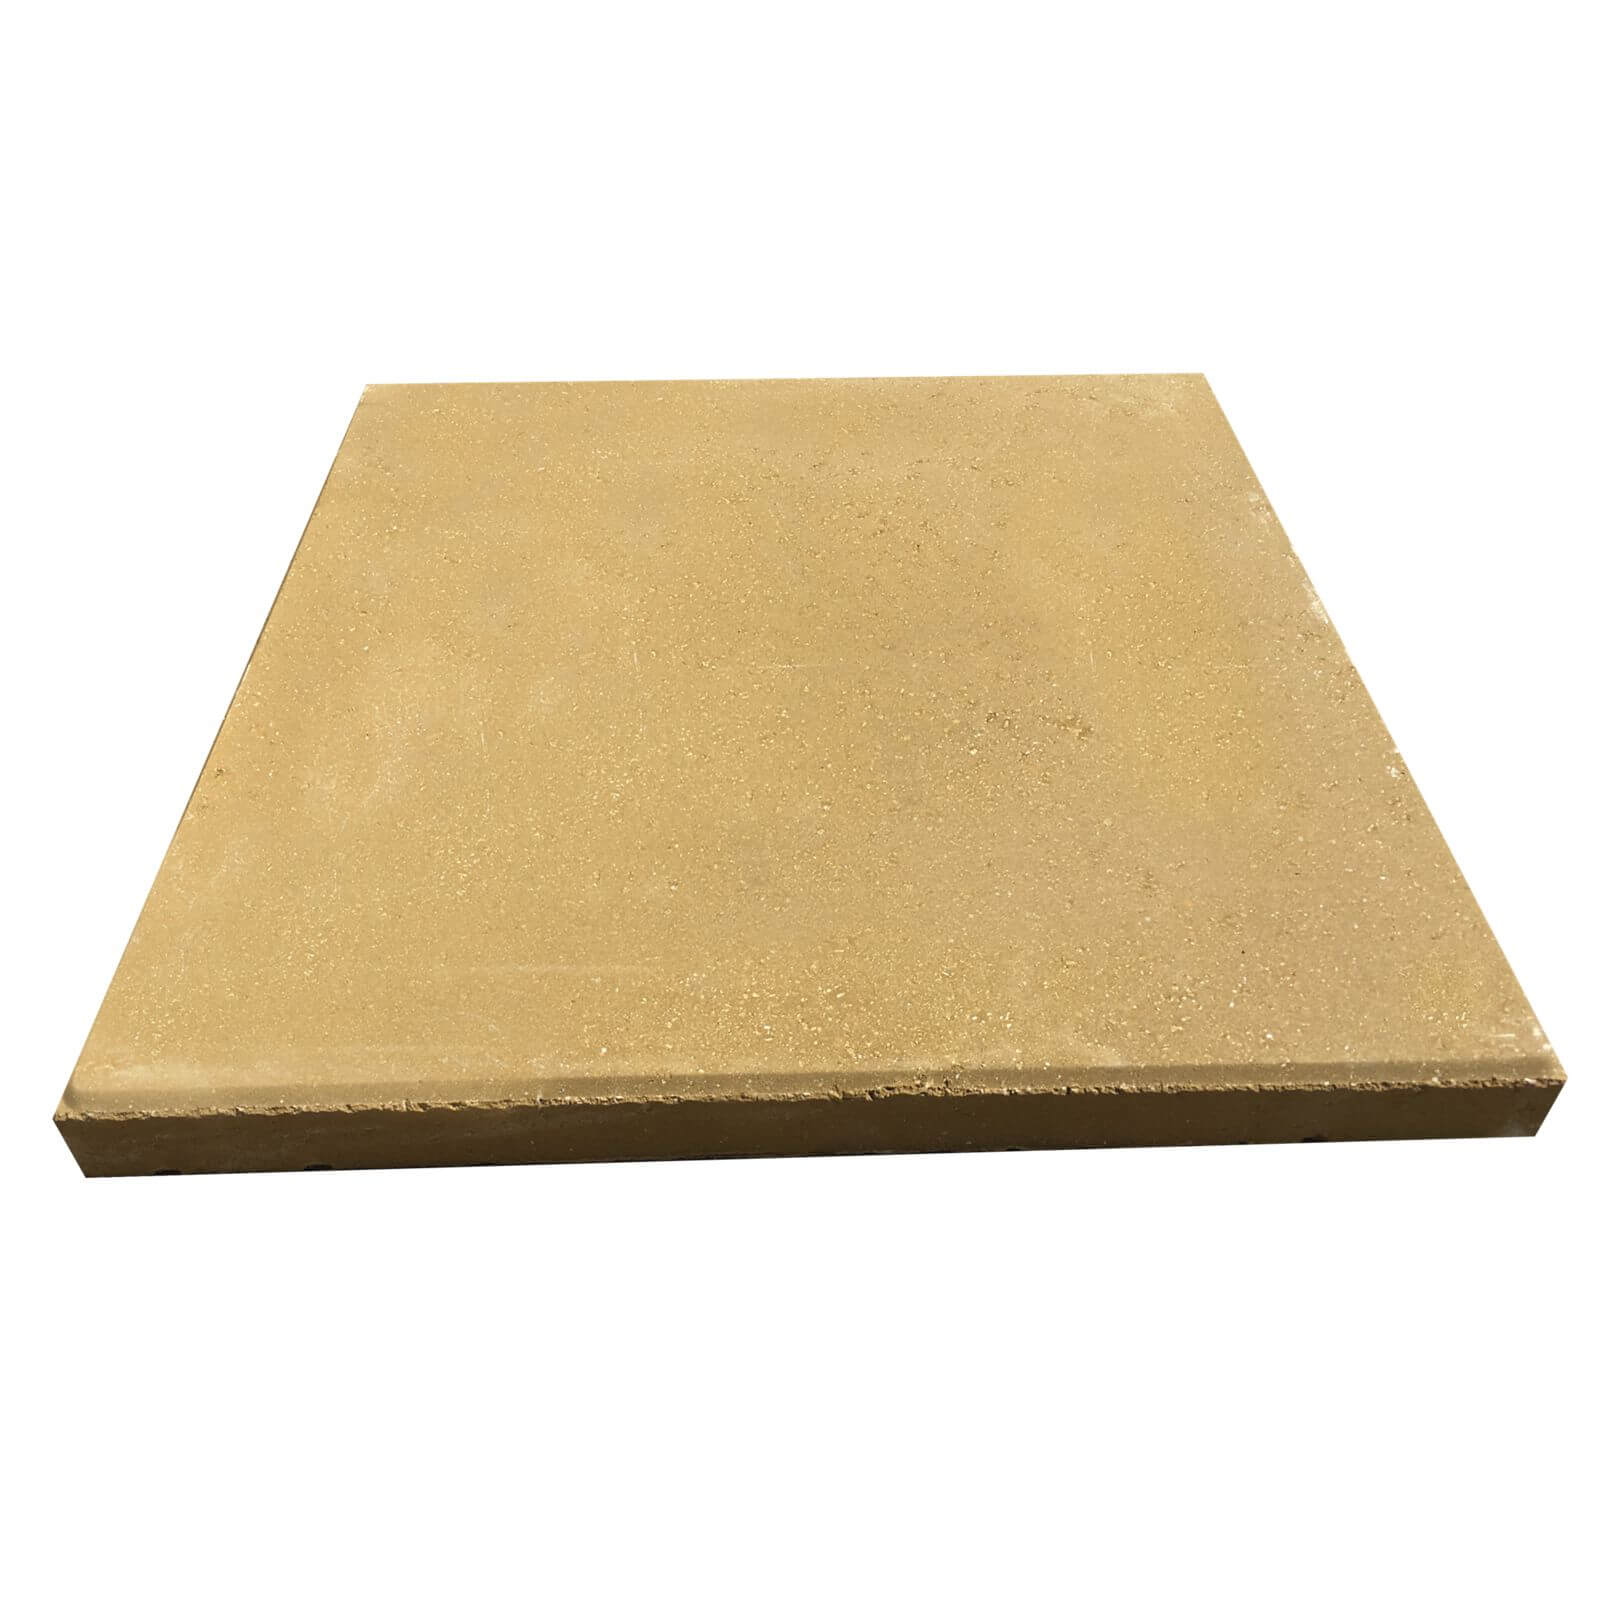 Photo of Stylish Stone Hereford Paving Smooth 450 X 450mm - Gold -full Pack-